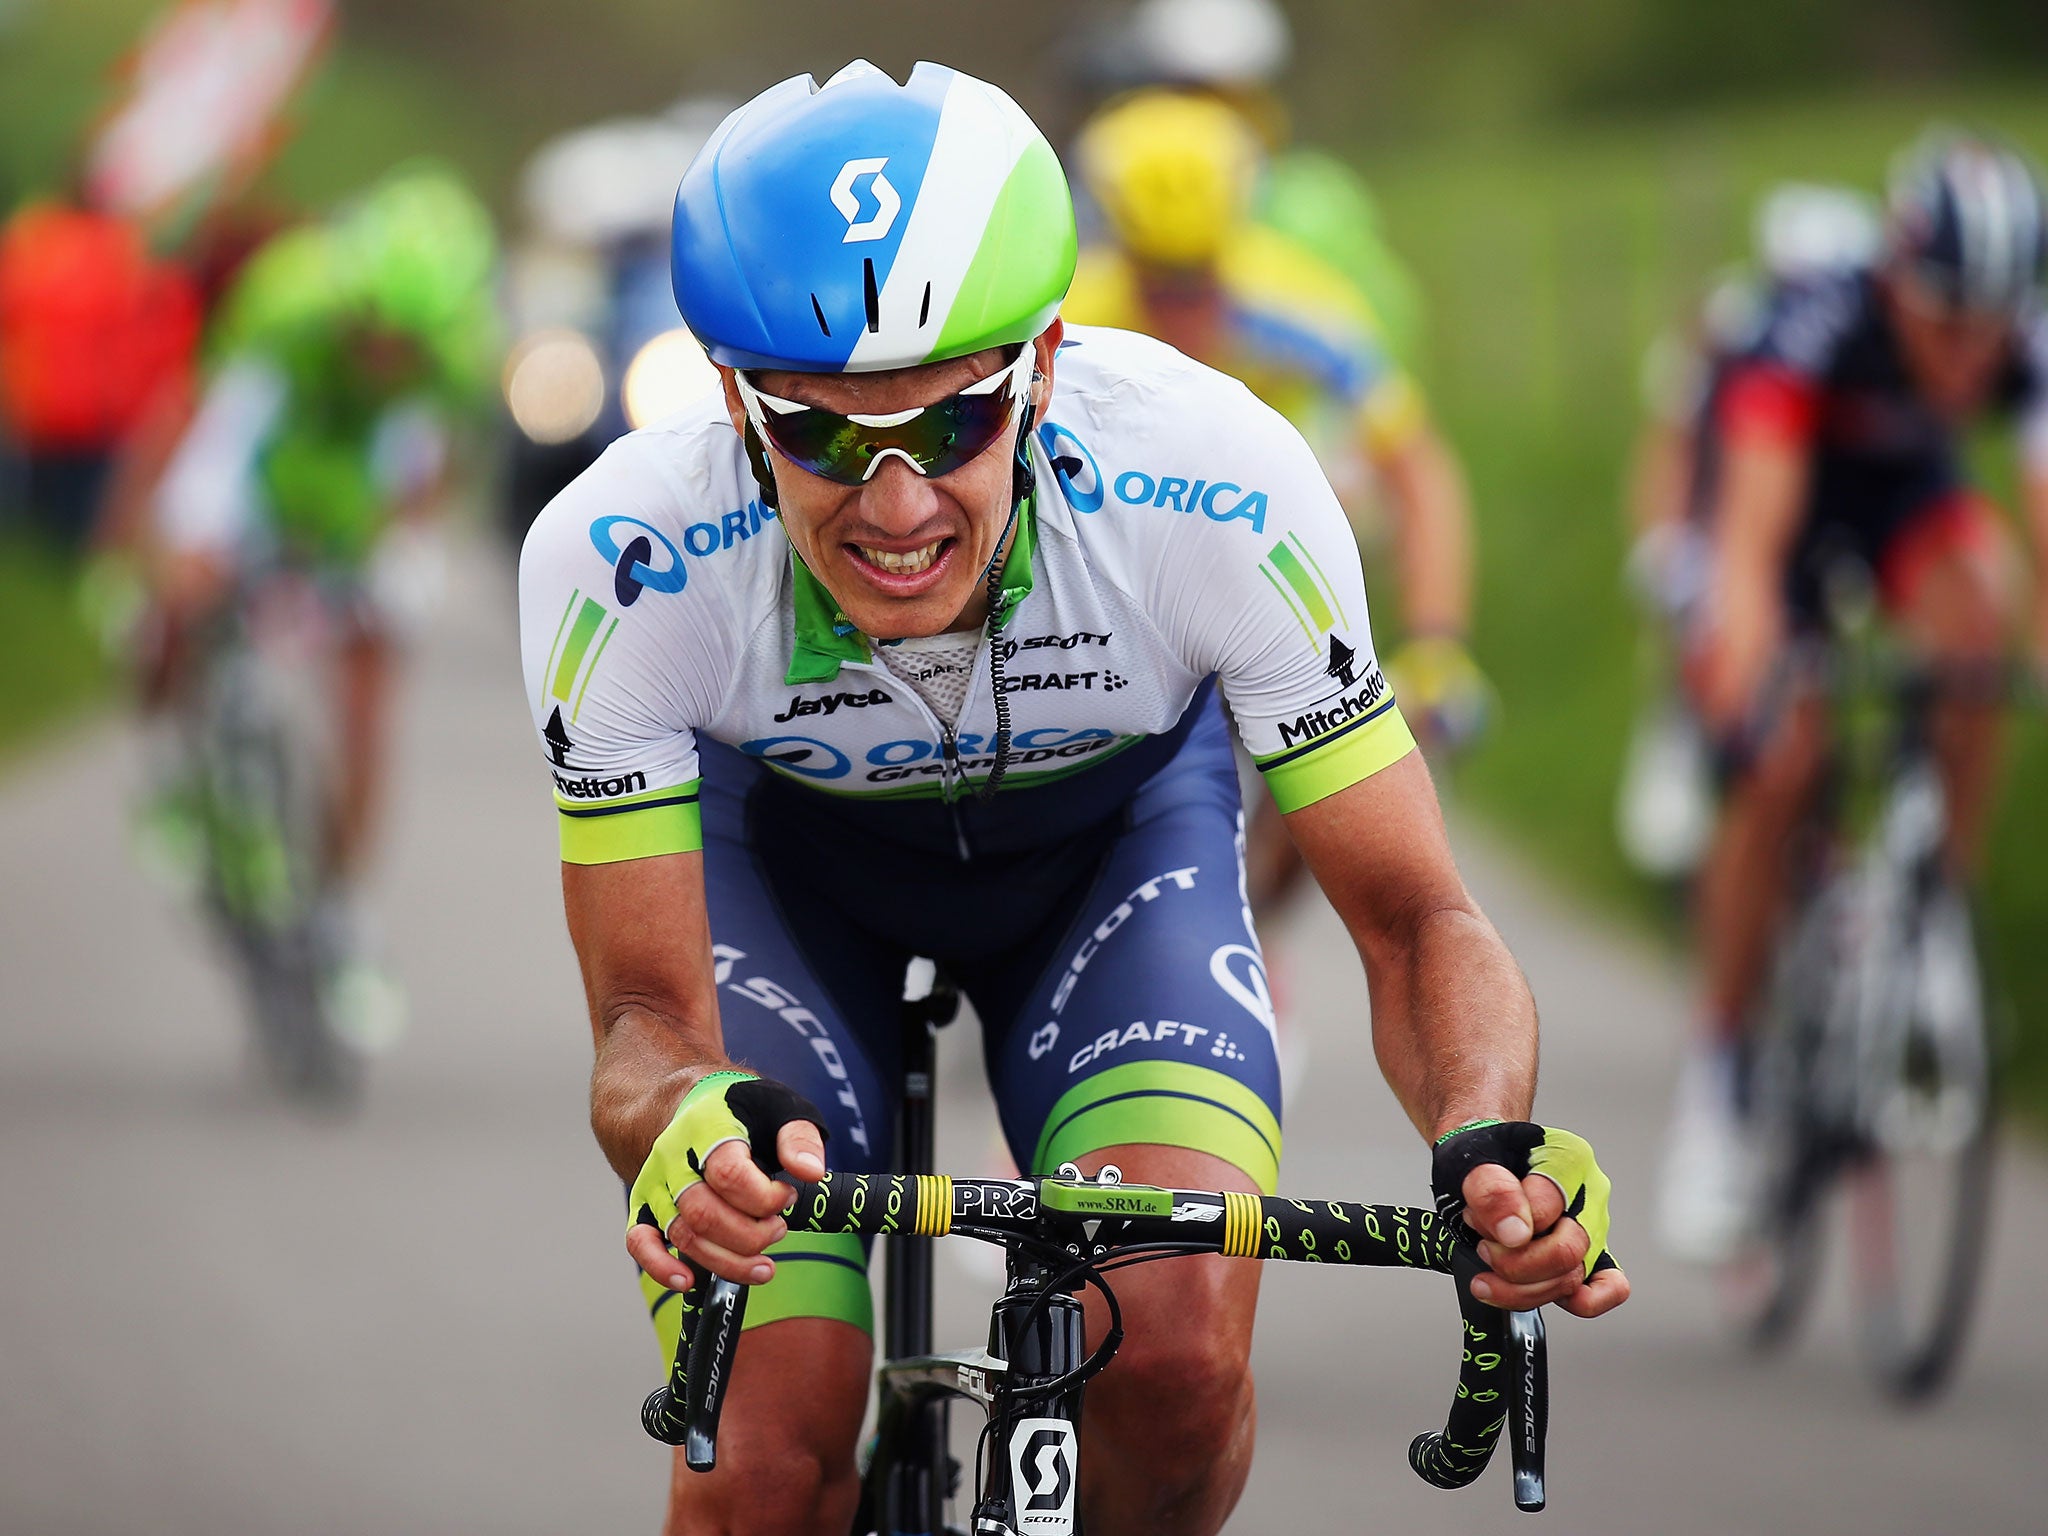 Daryl Impey of South Africa and Orica GreenEDGE in action during the 49th edition of the Amstel Gold Race on April 20, 2014 in Maastricht, Netherlands.